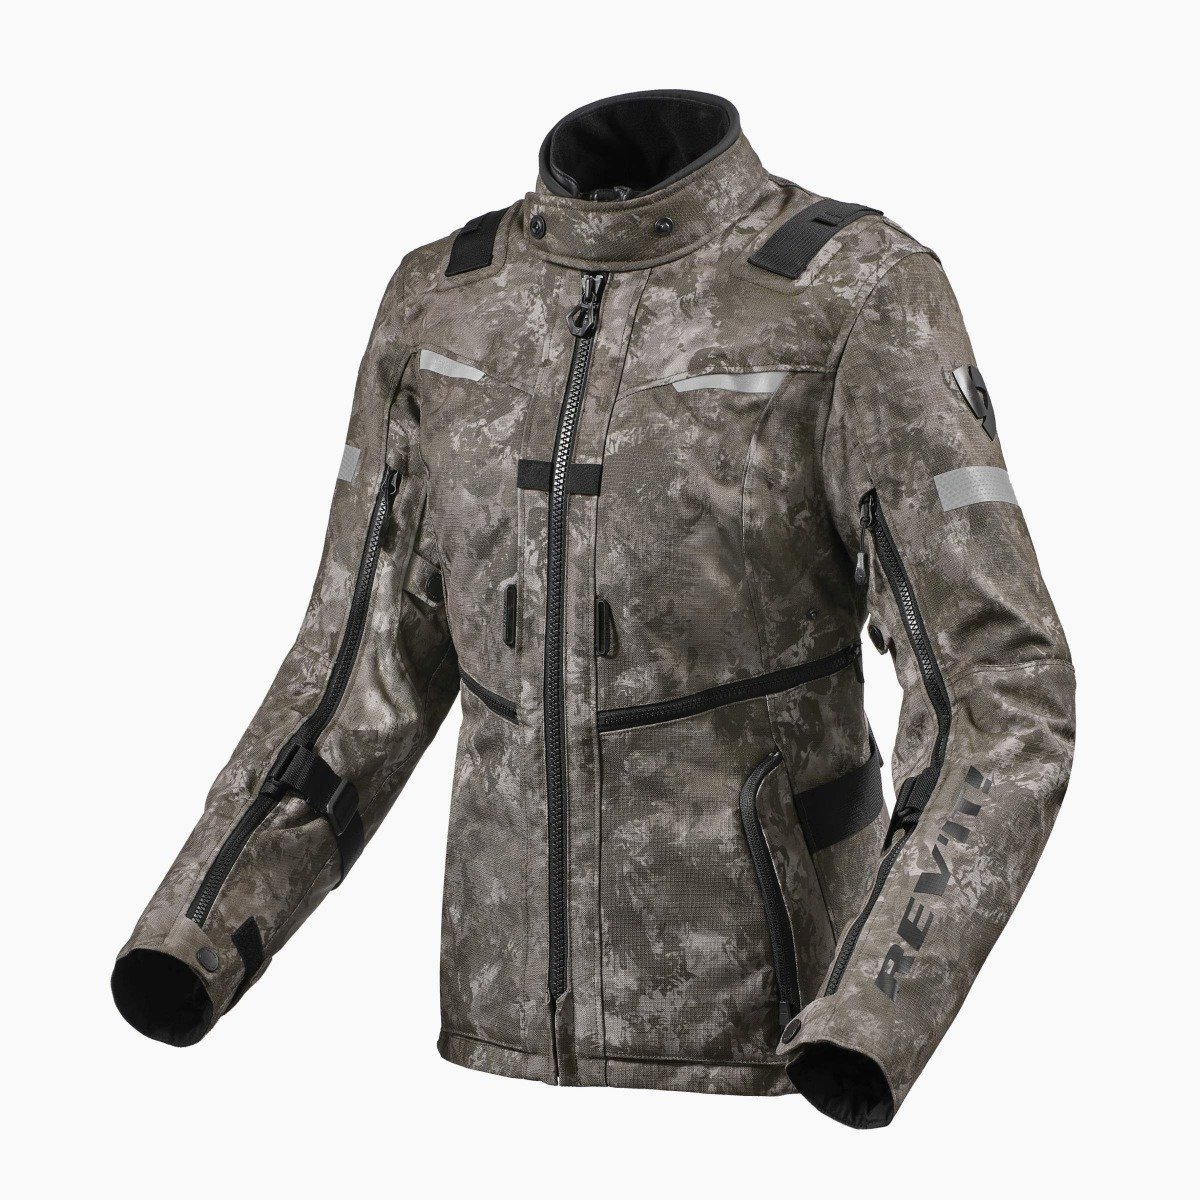 Image of REV'IT! Sand 4 H2O Jacket Lady Camo Brown Talla 34